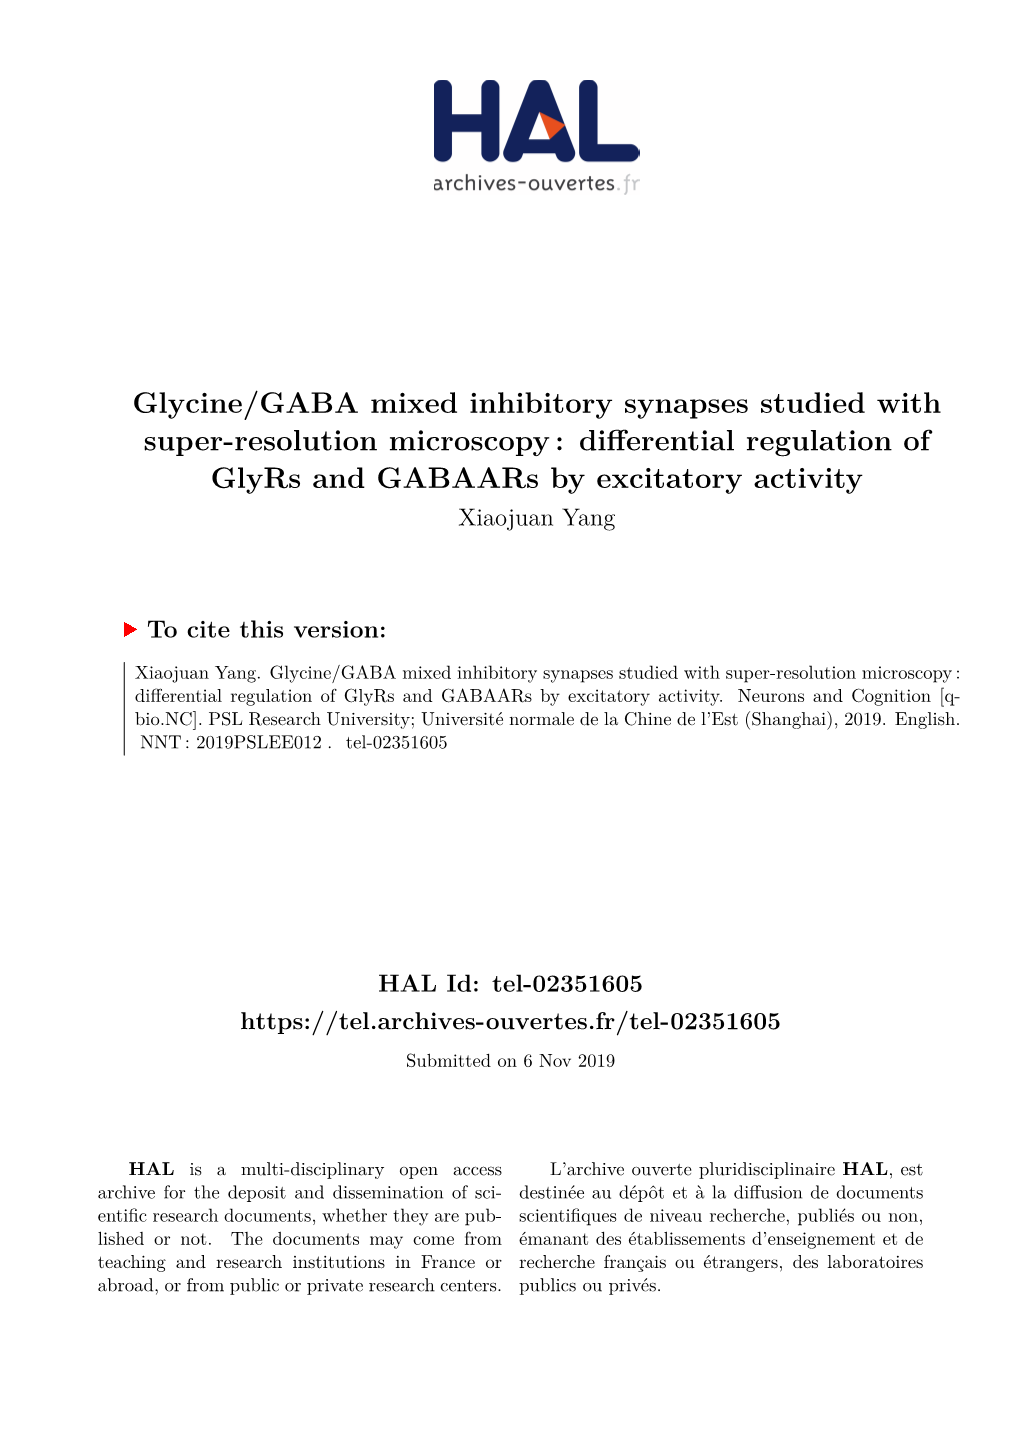 Glycine/GABA Mixed Inhibitory Synapses Studied with Super-Resolution Microscopy : Differential Regulation of Glyrs and Gabaars by Excitatory Activity Xiaojuan Yang